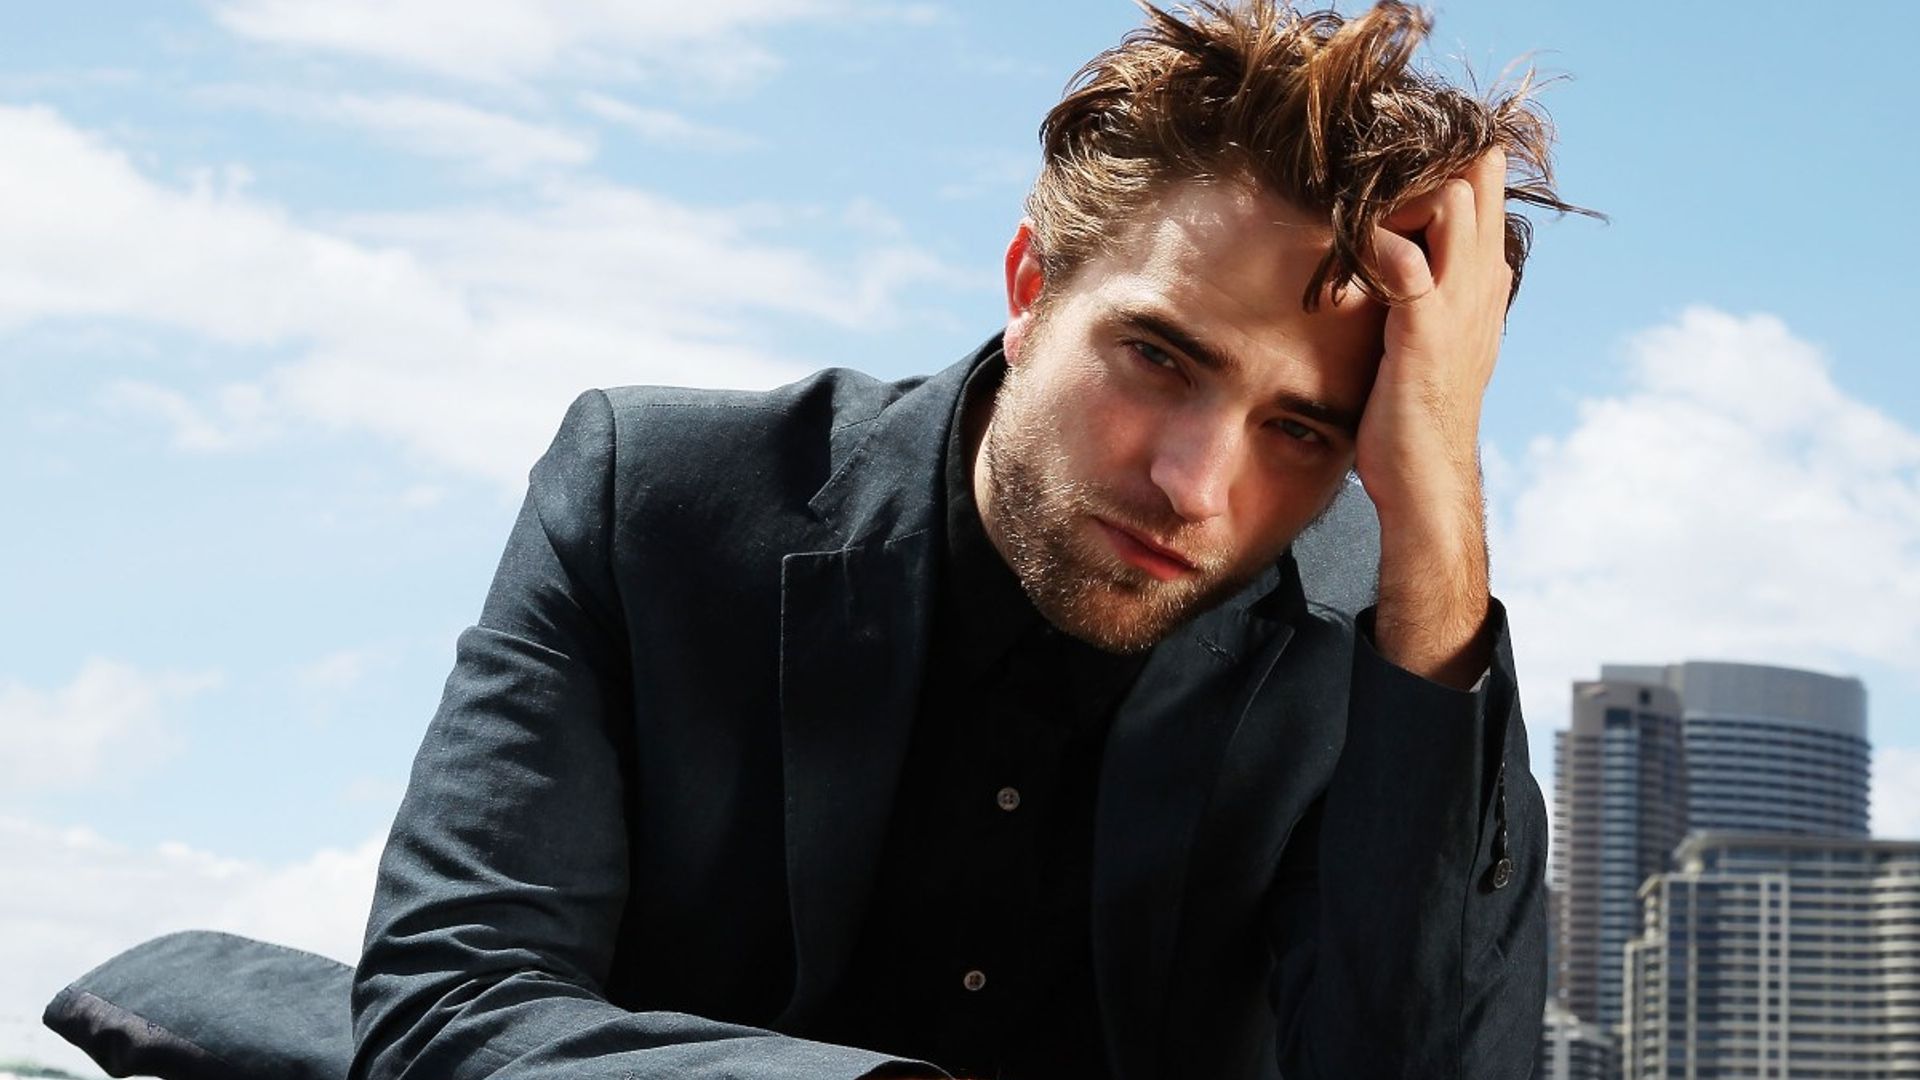 Robert Pattinson panics after blowing up microwave during lockdown interview 